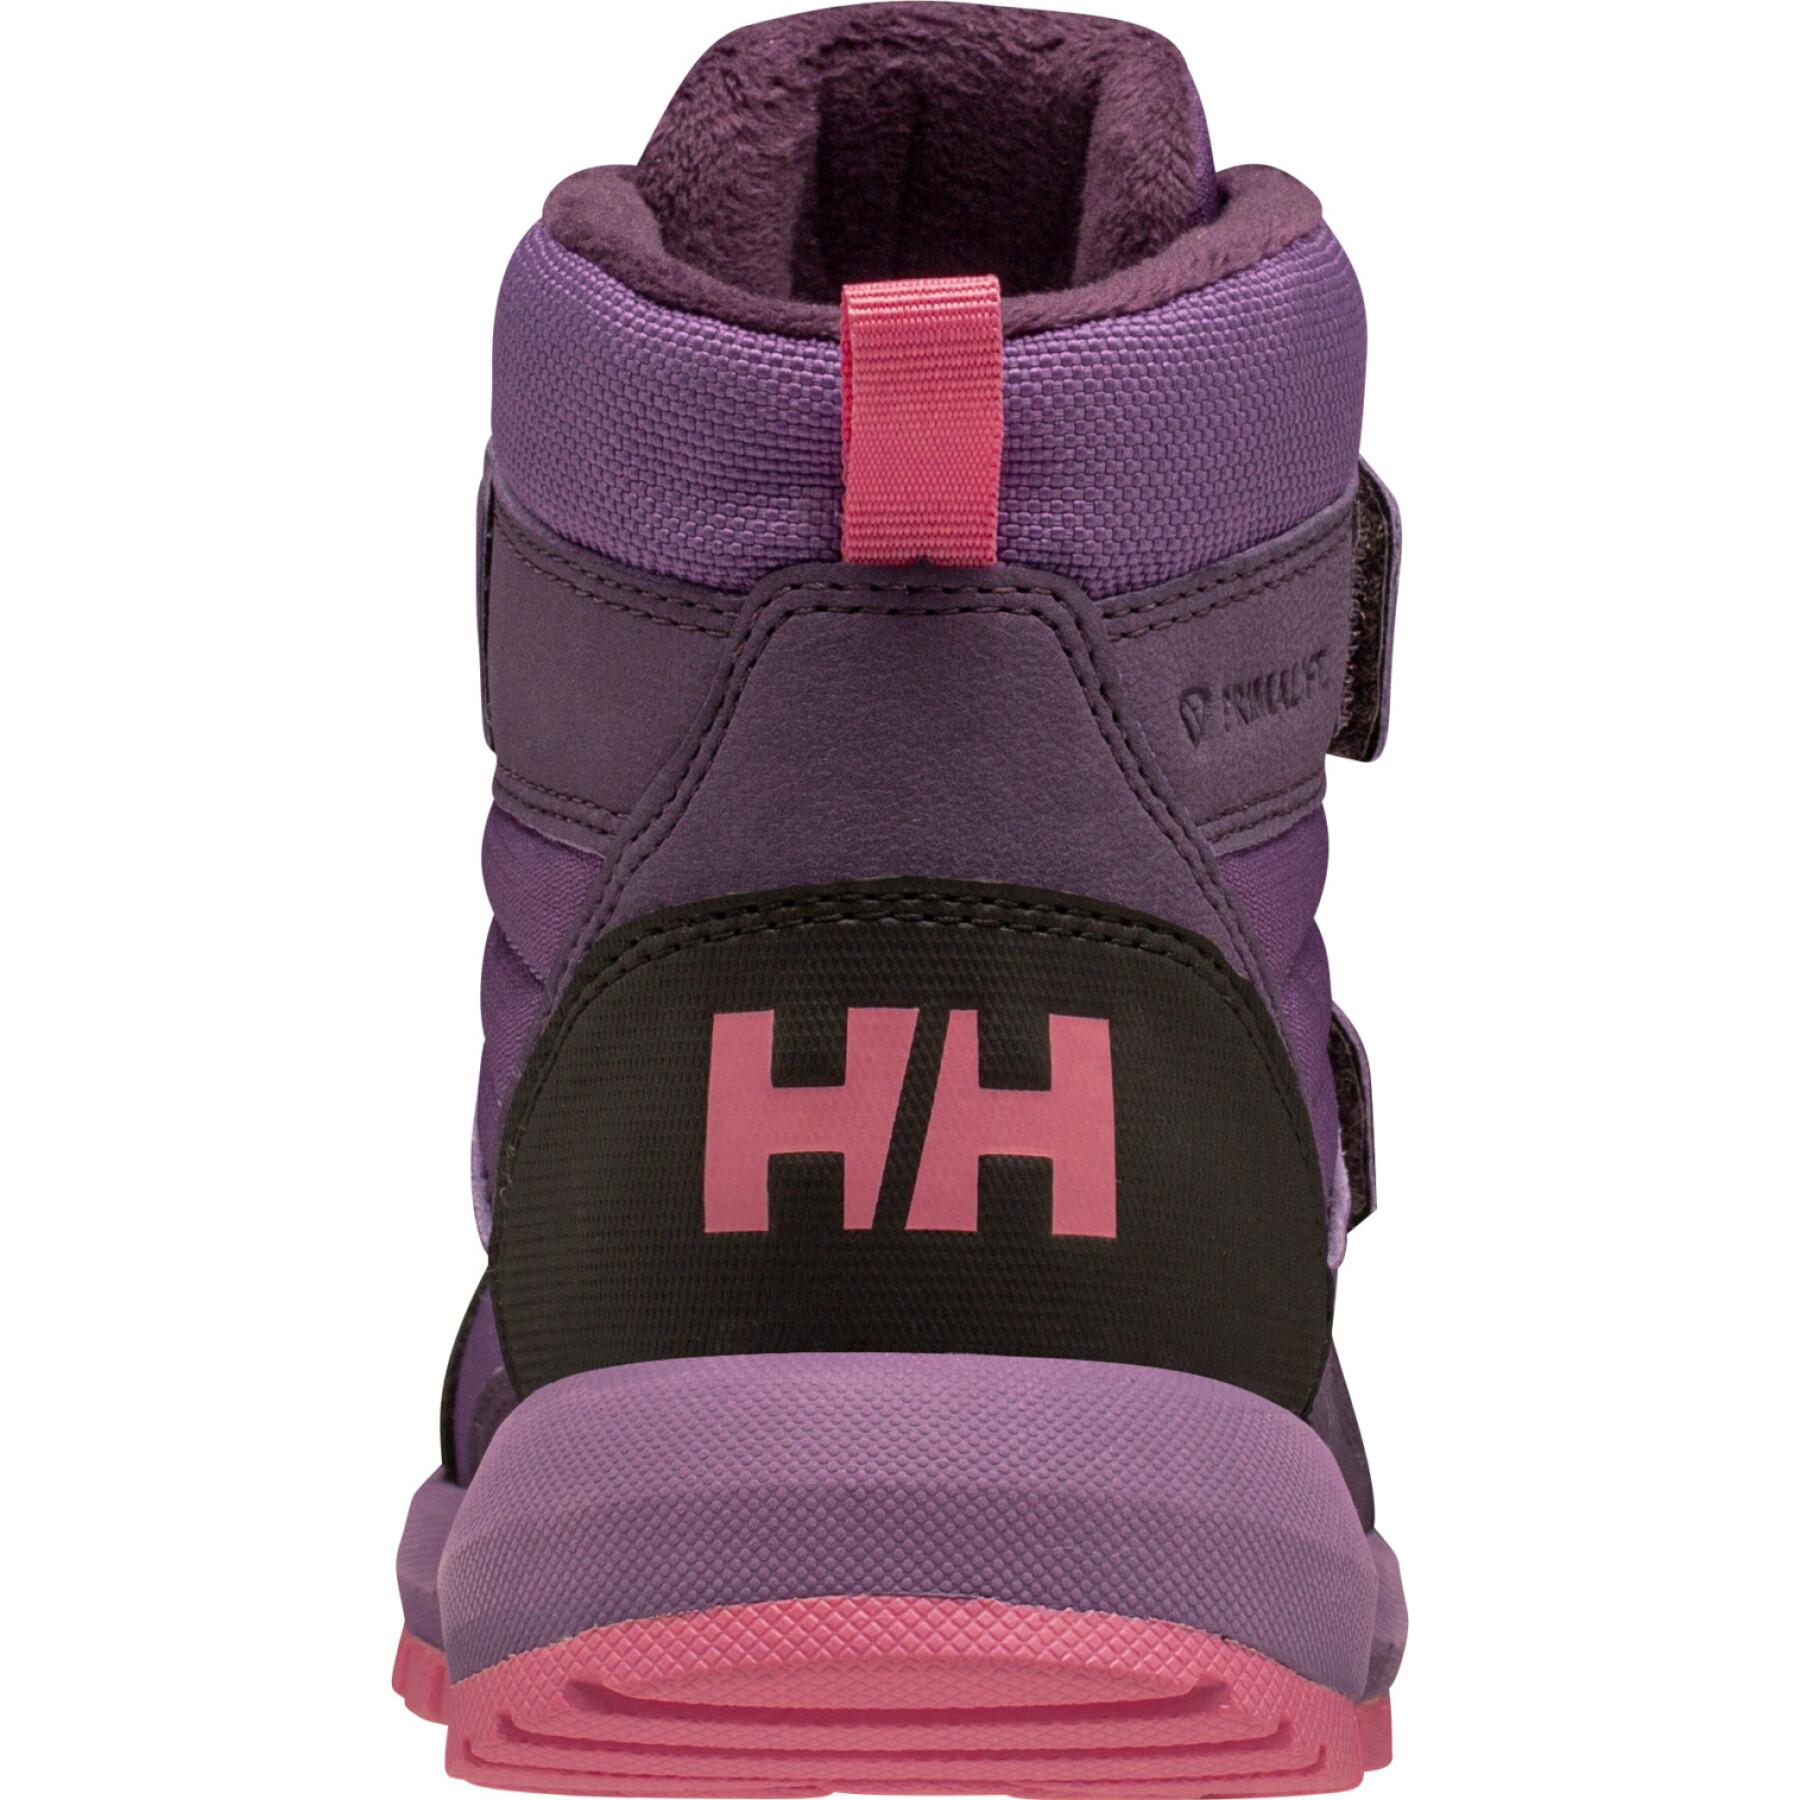 Stivale invernale per bambini Helly Hansen Bowstring Ht